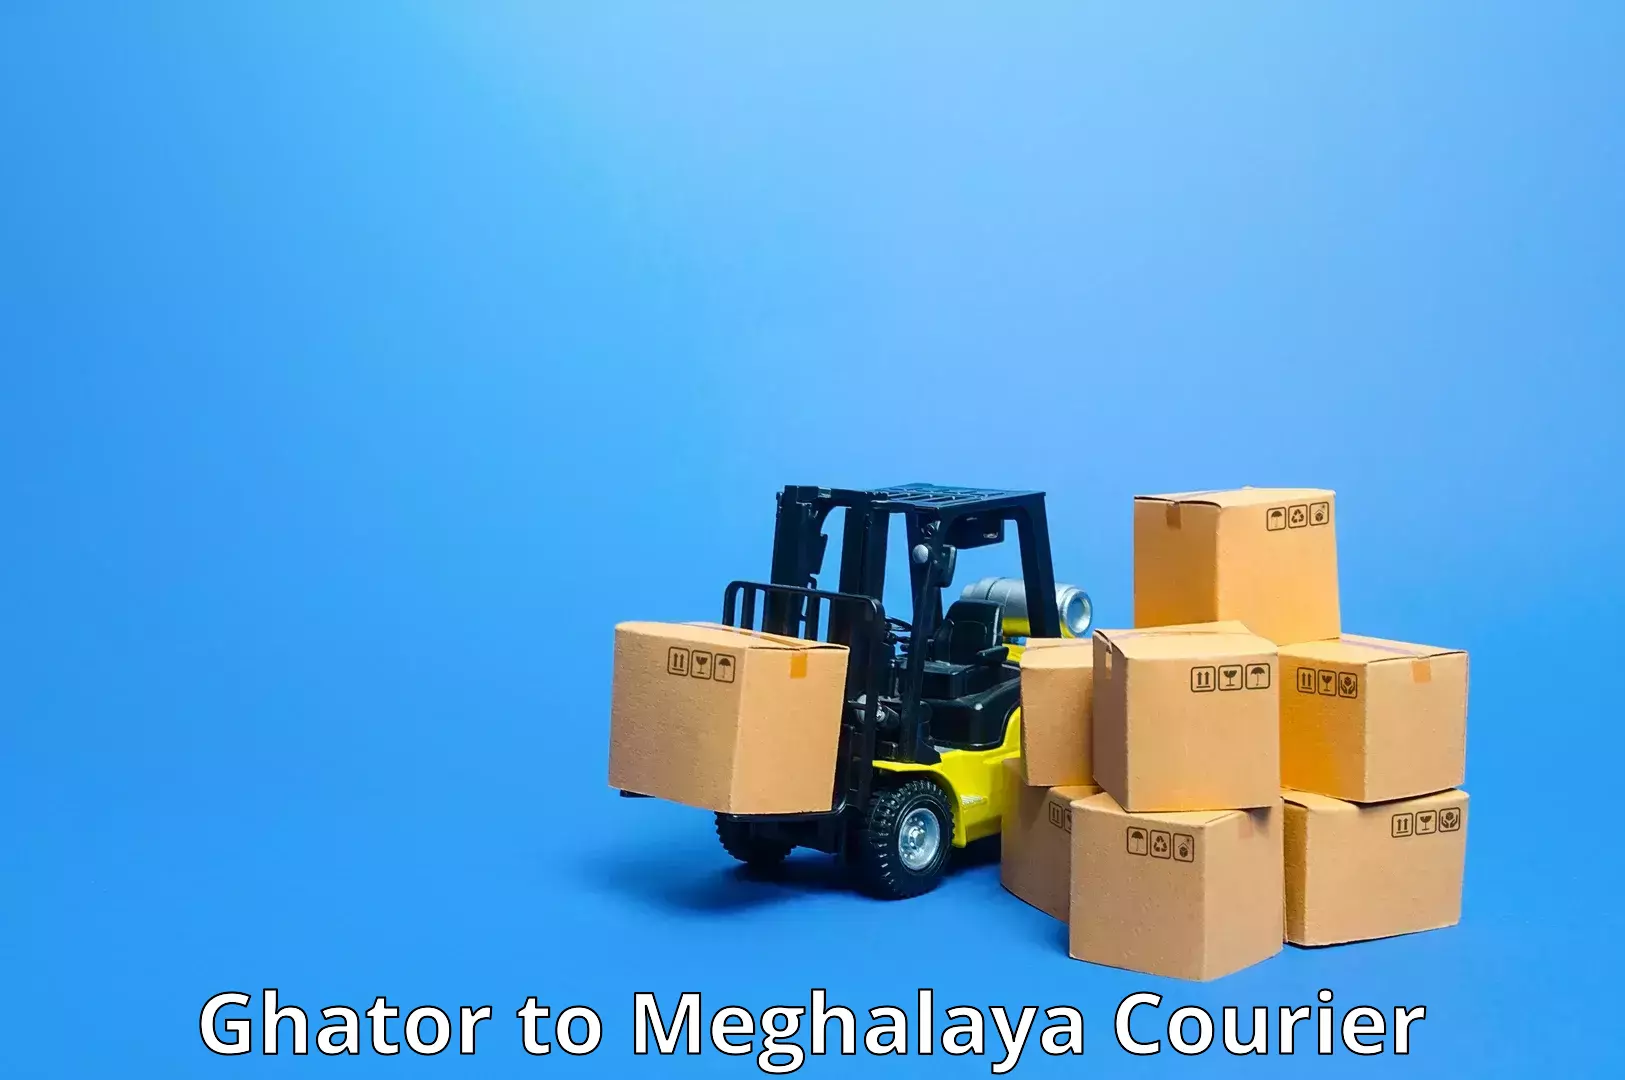 Overnight delivery services Ghator to Meghalaya